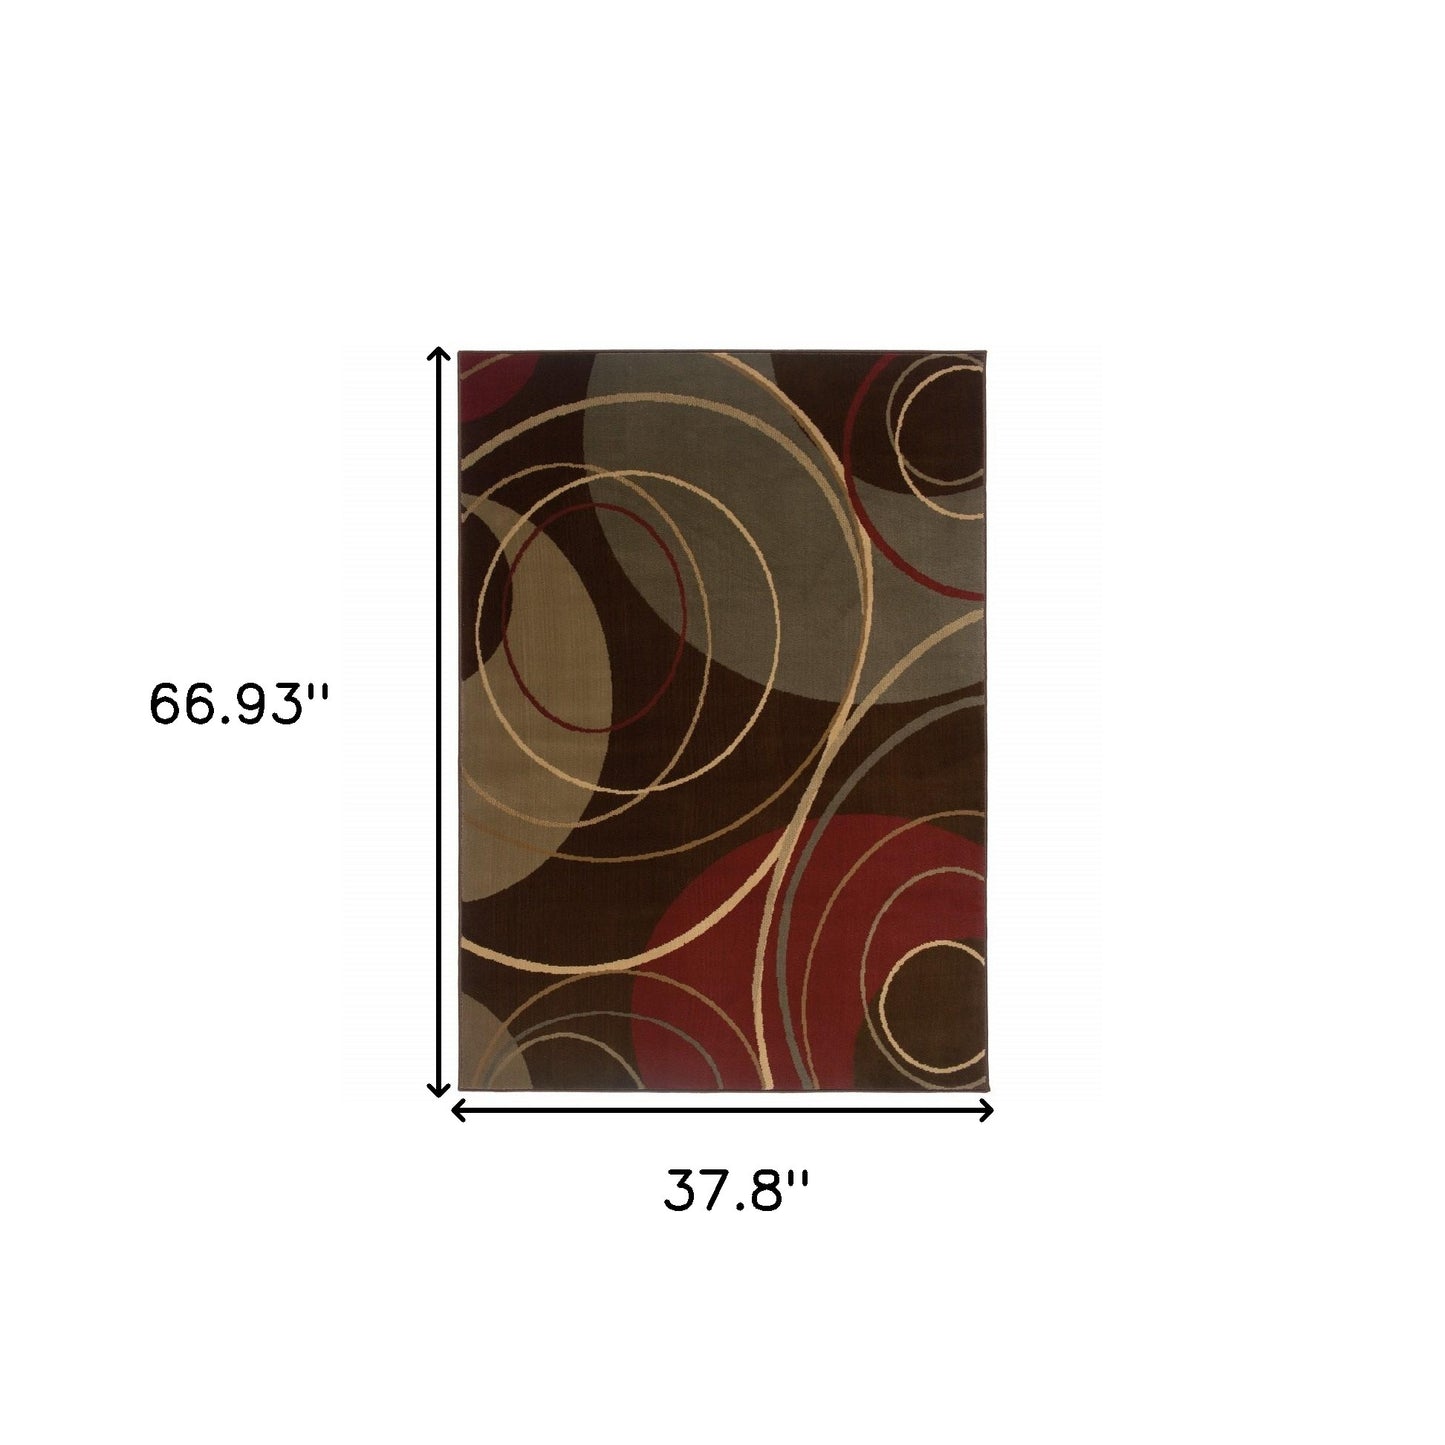 5'X8' Brown And Red Abstract  Area Rug